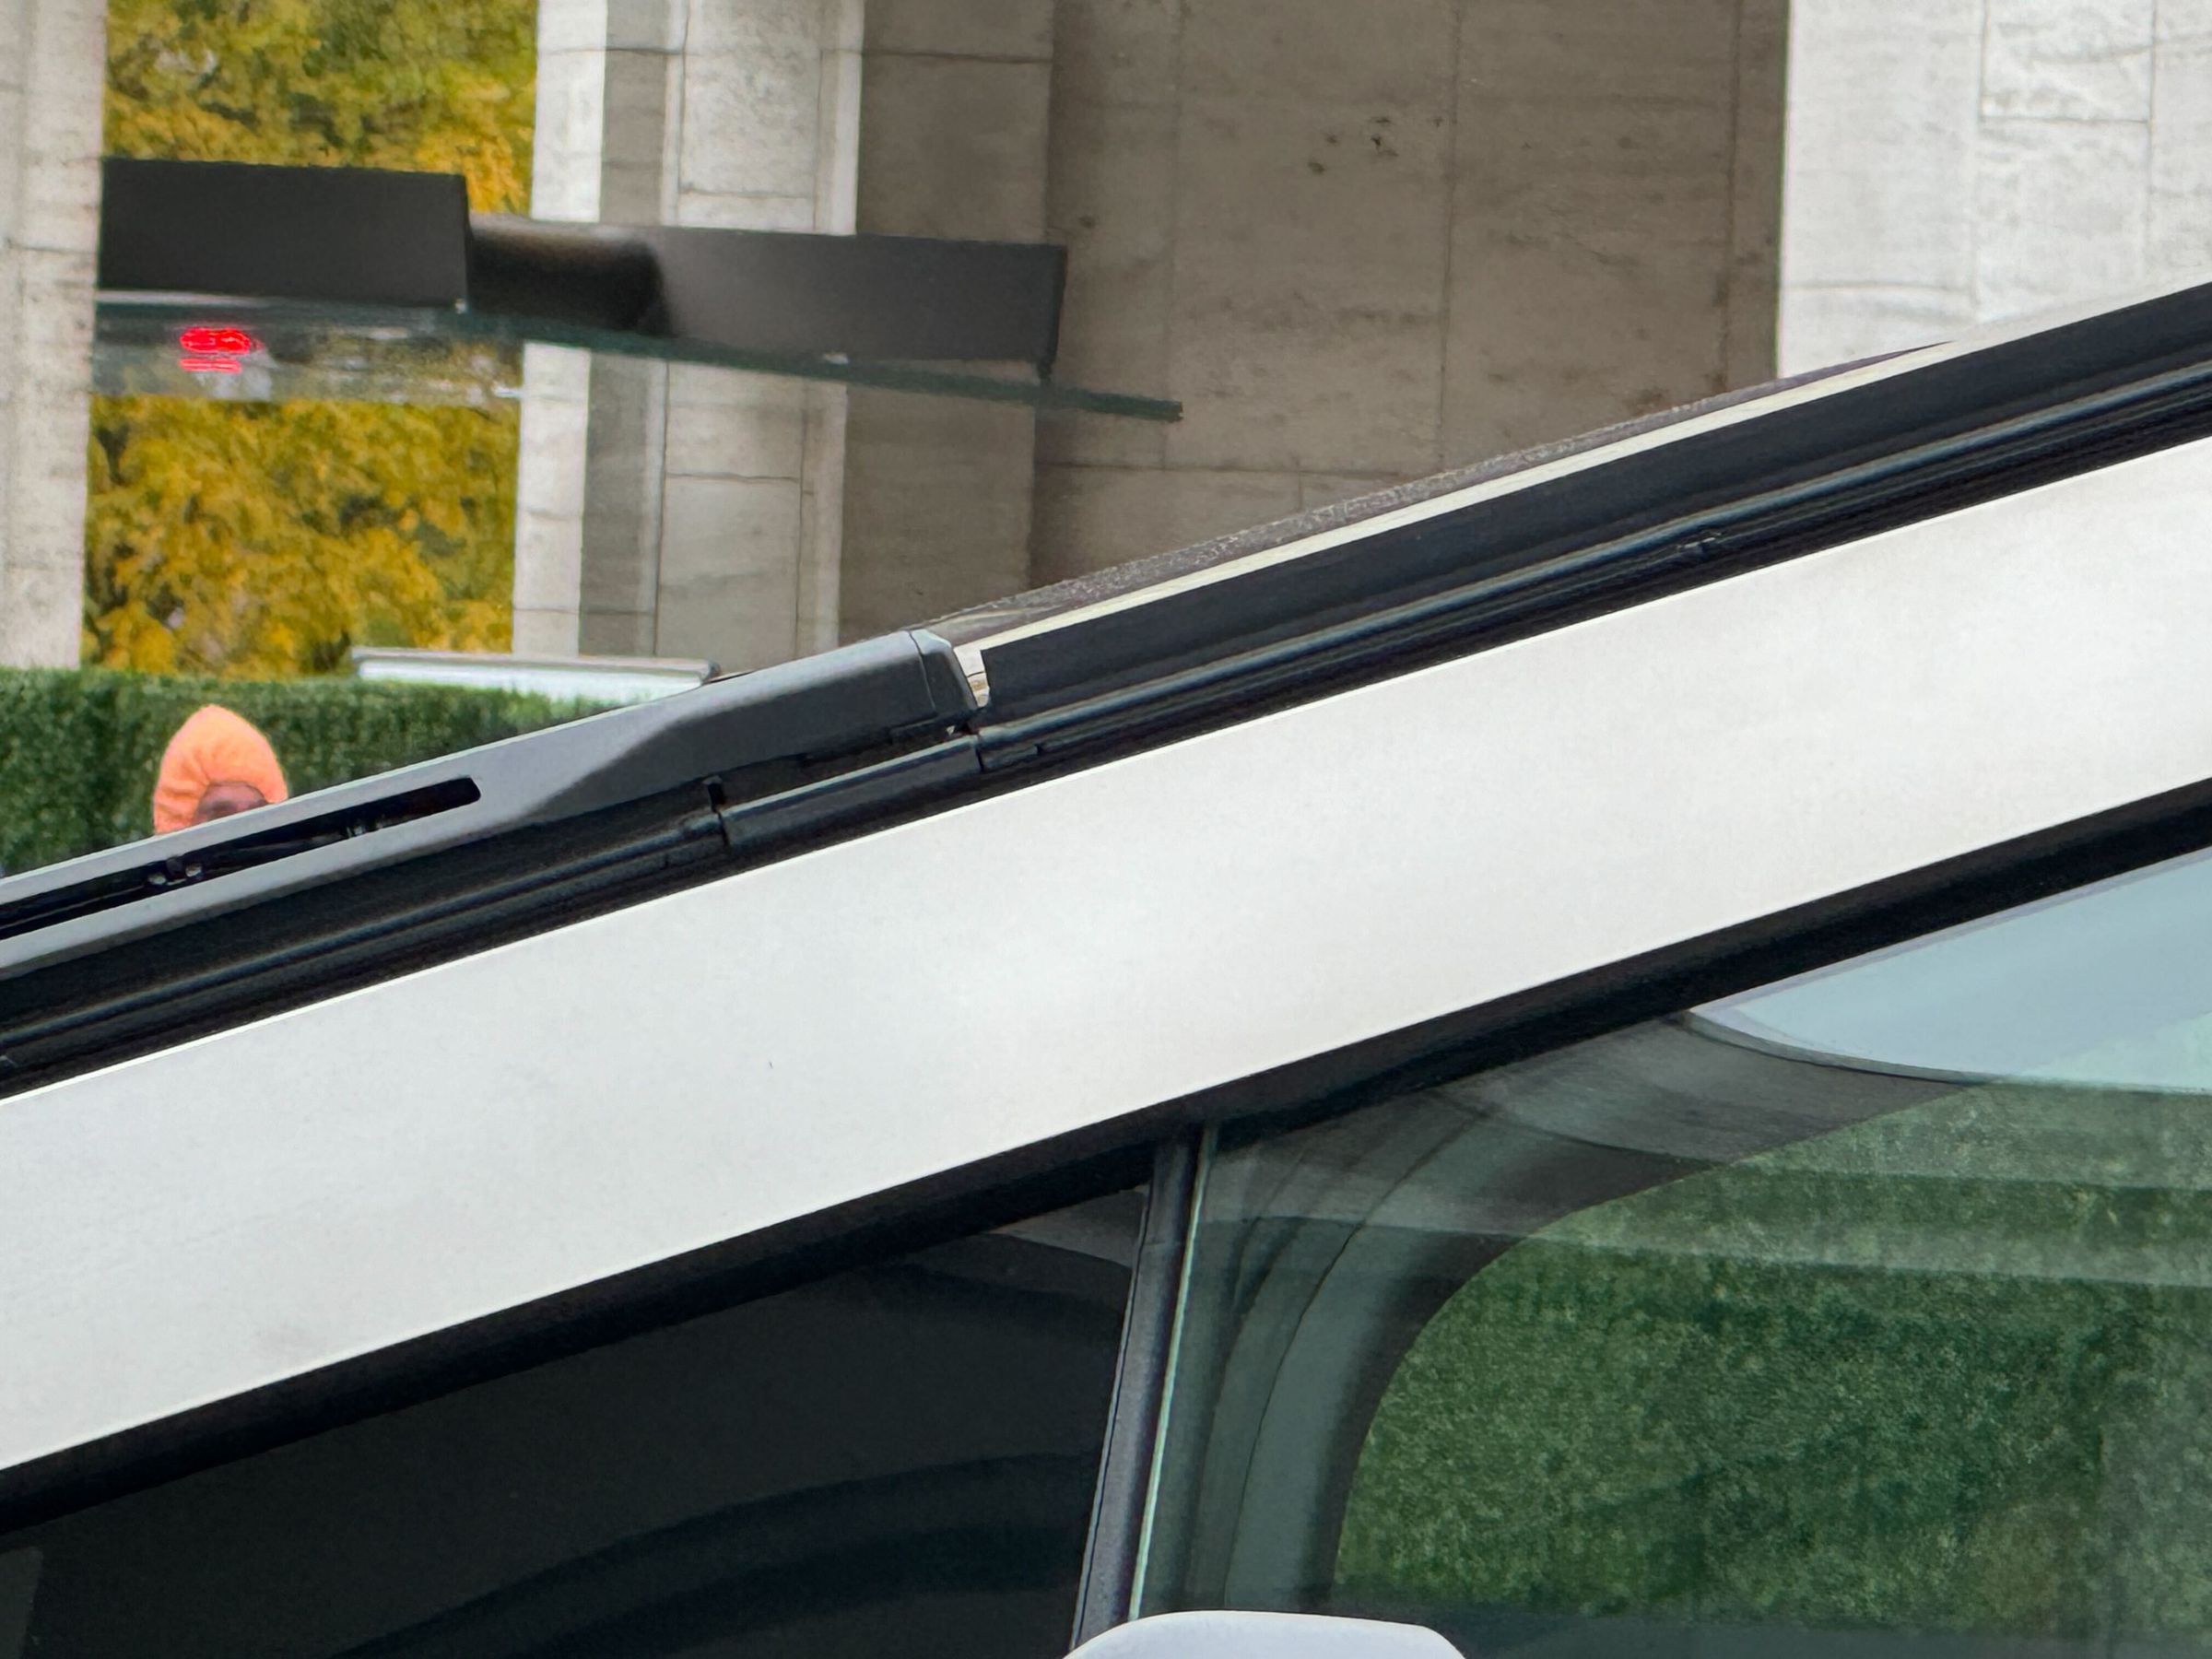 The Tesla Cybertruck Wiper viewed from the driver side, showing that it appears to be two piece.